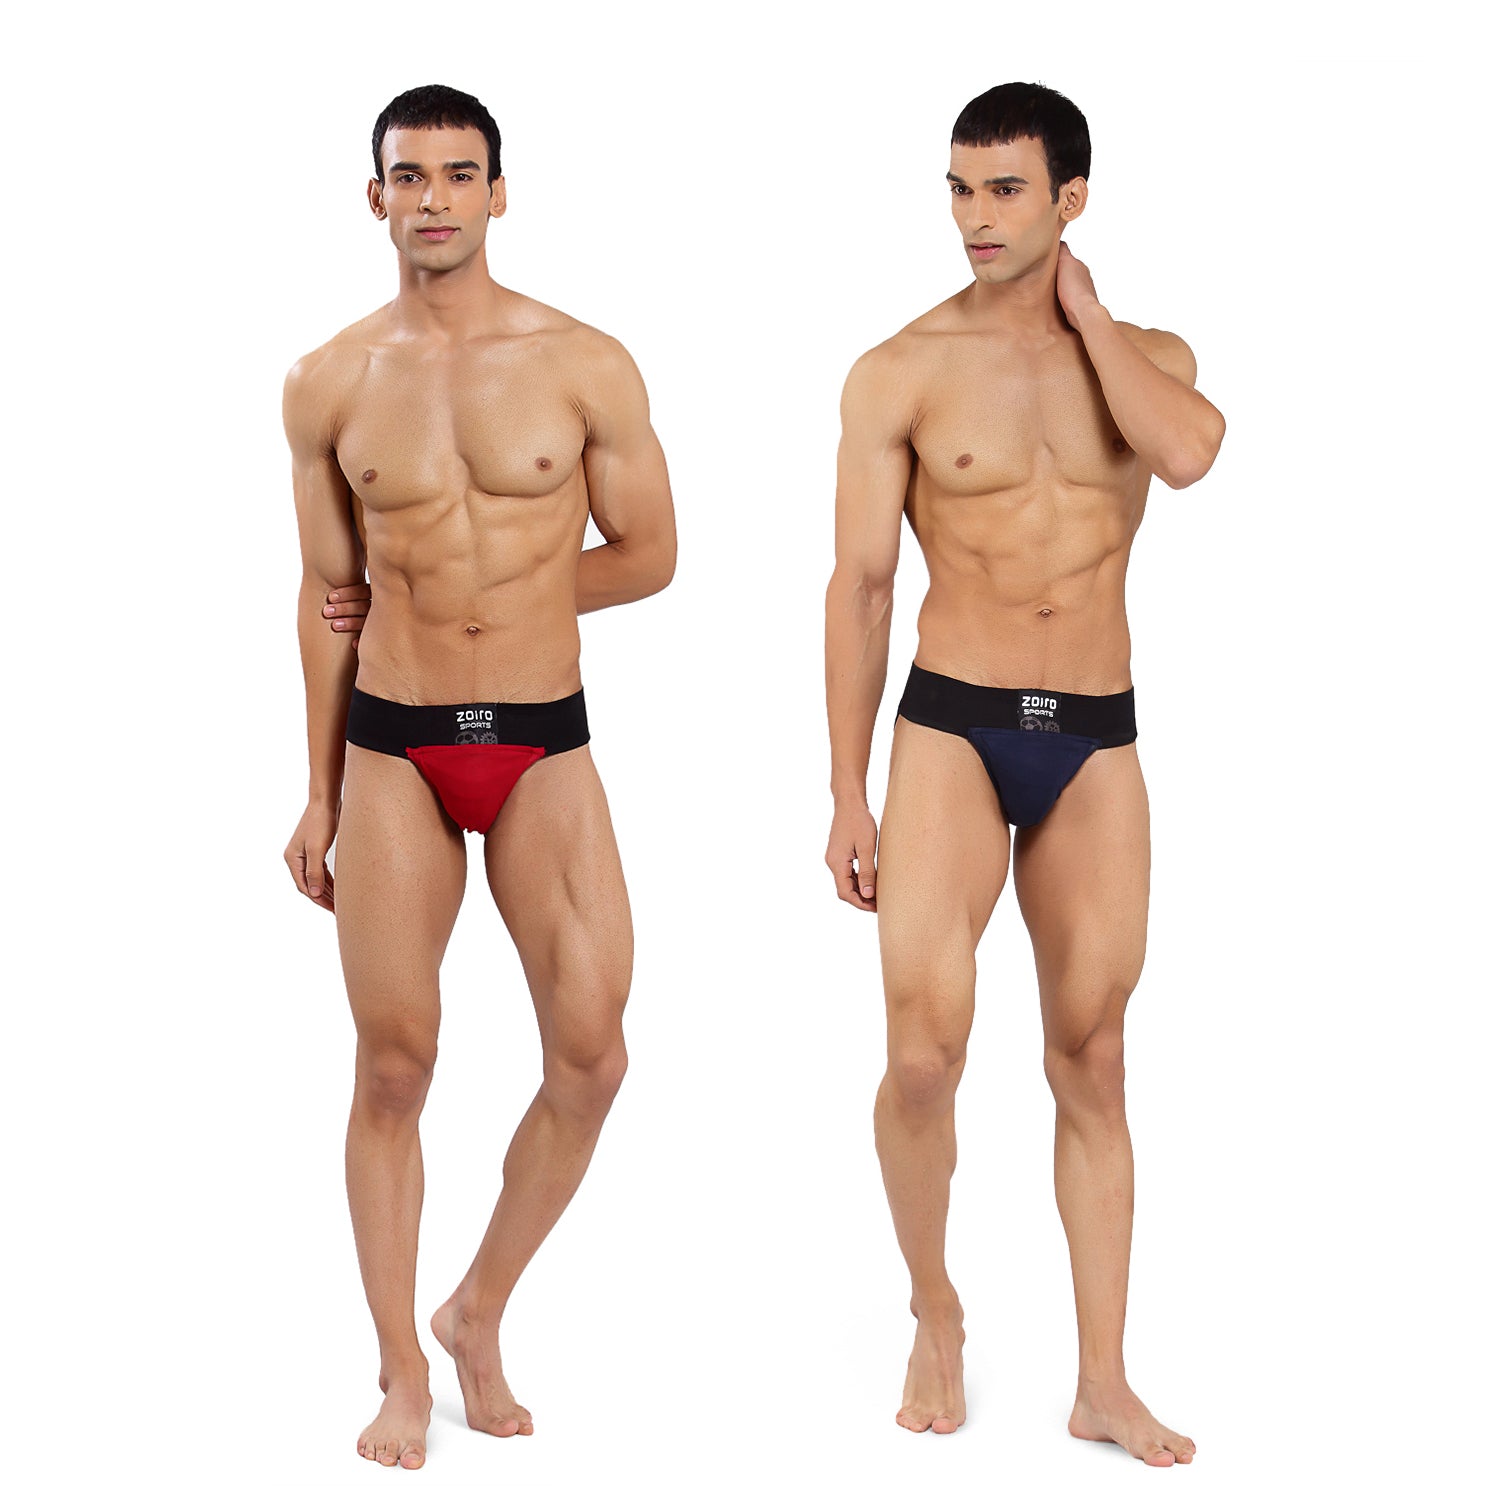 Buy Now Zoiro Men's Cotton Sports Gym Supporter Brief (Pack, 50% OFF